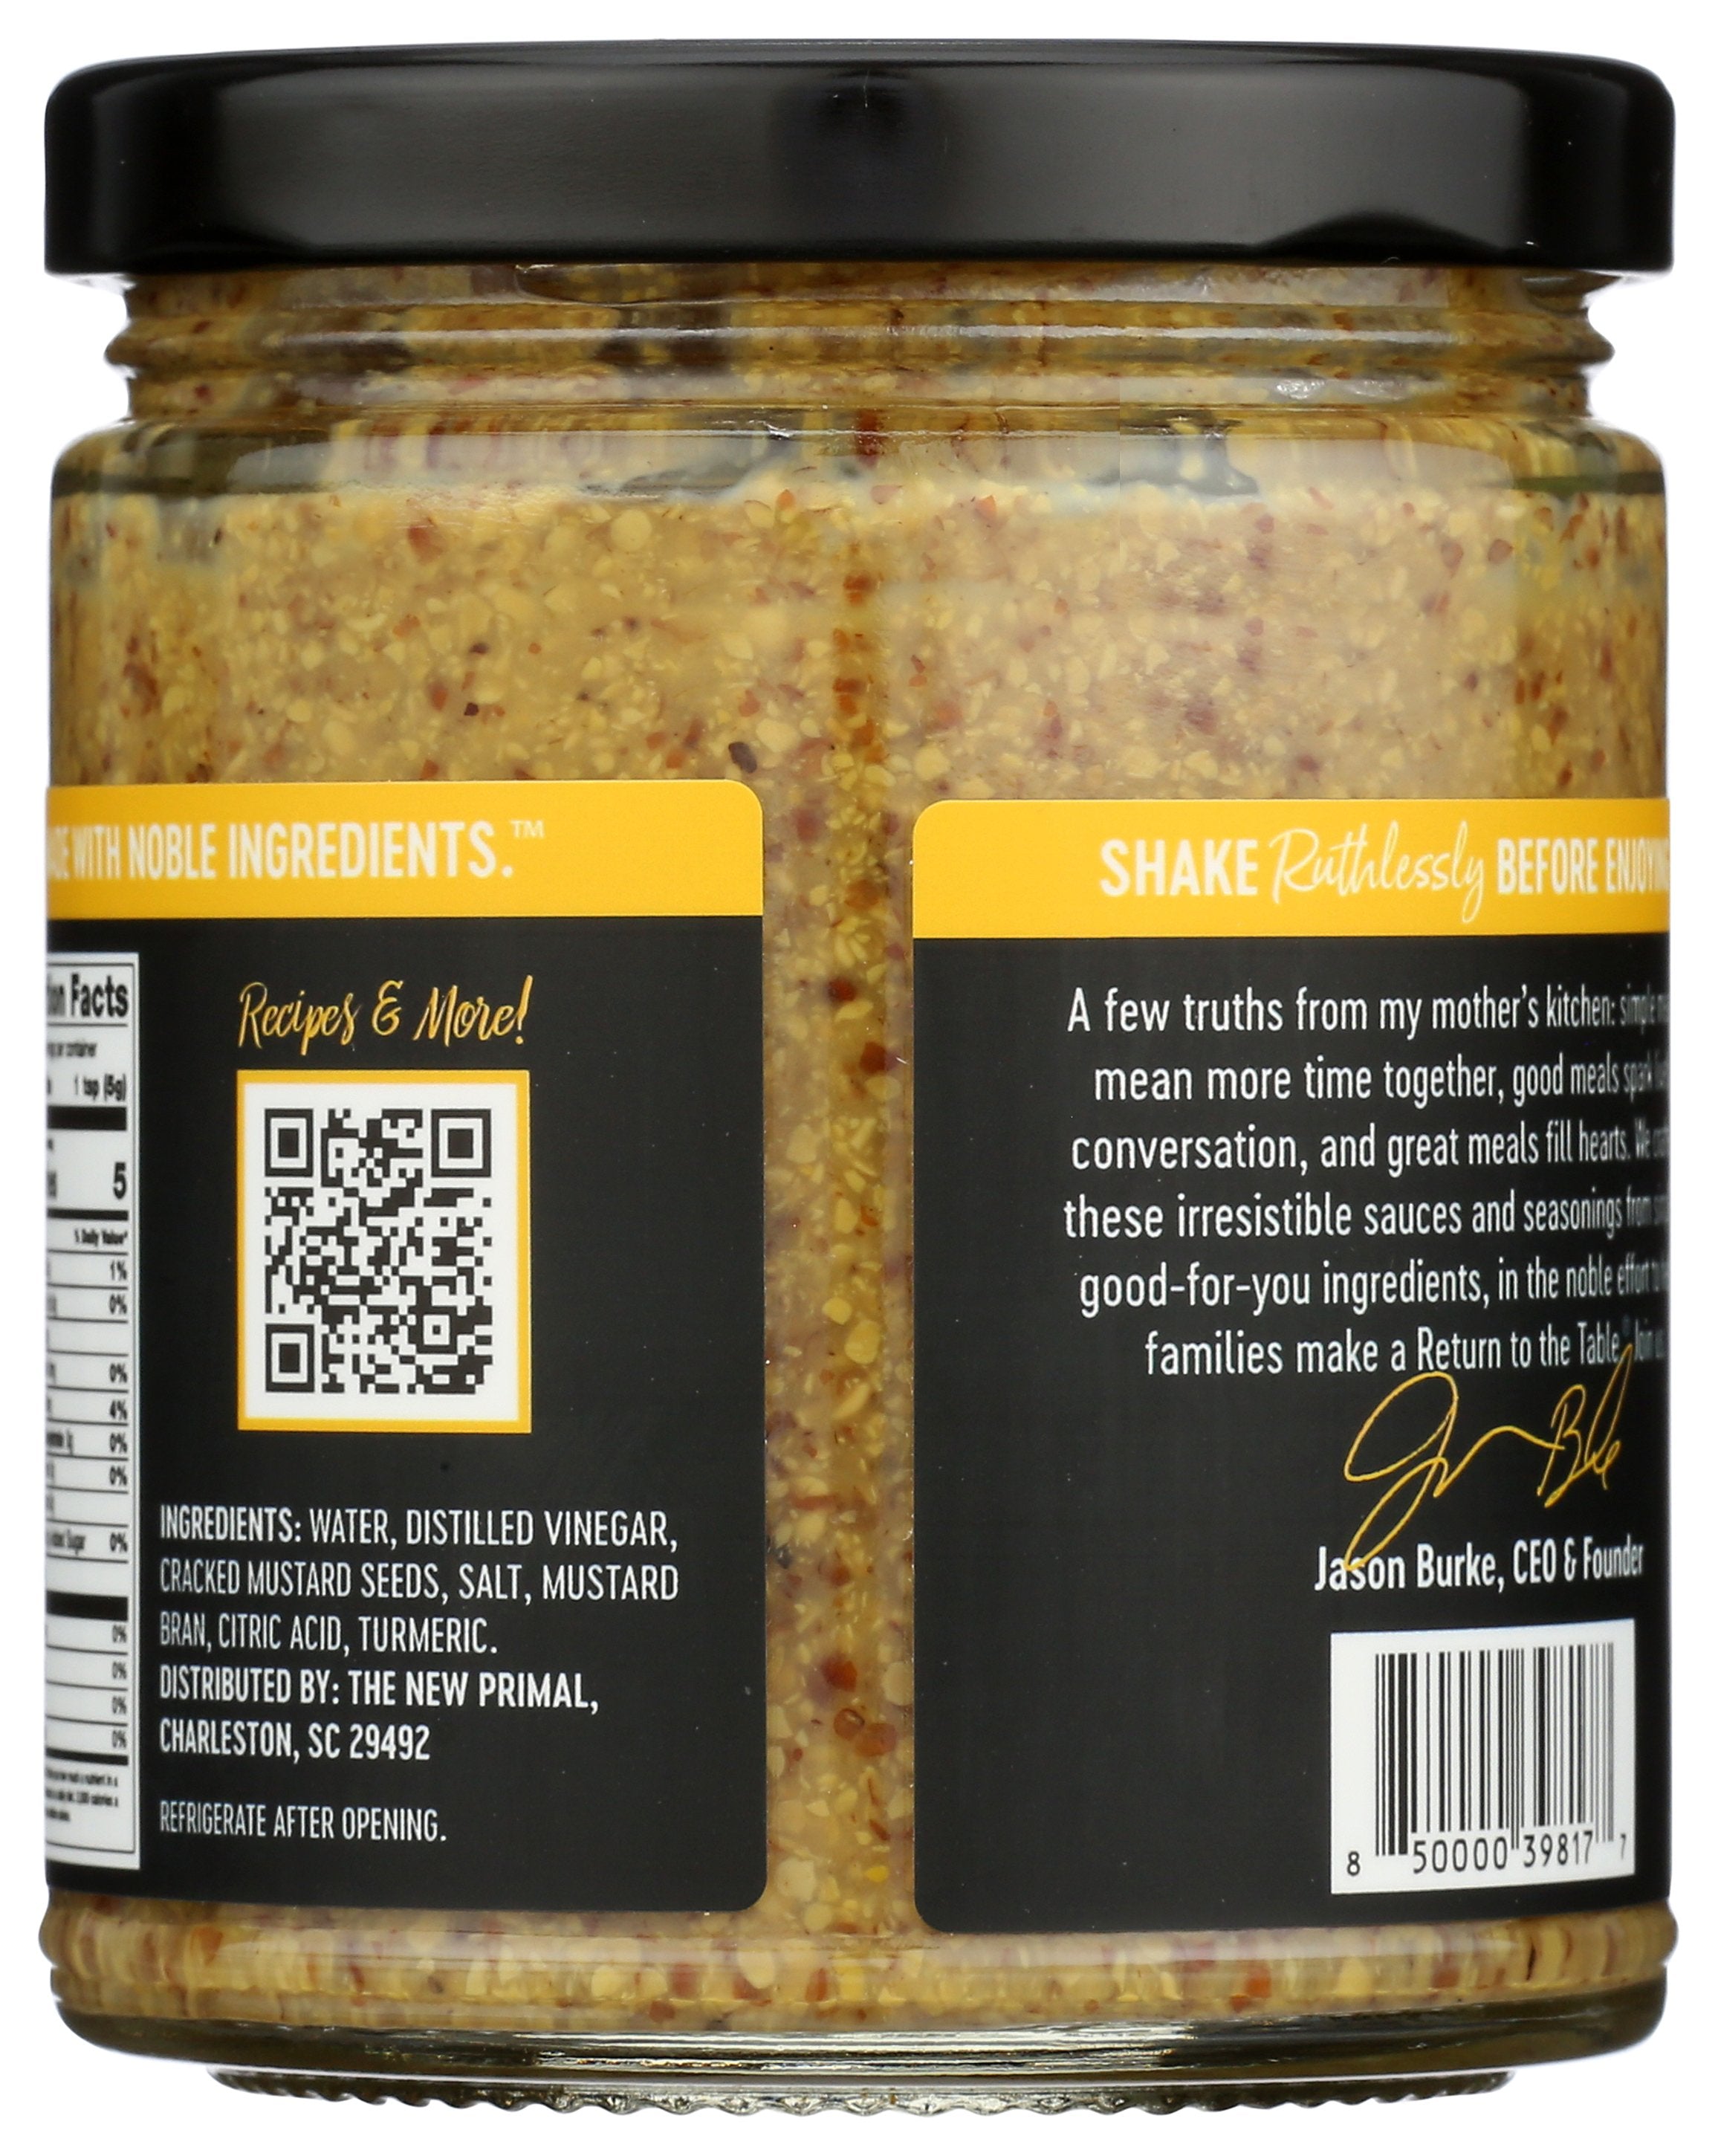 THE NEW PRIMAL MUSTARD NOBLE MADE DIJON - Case of 6